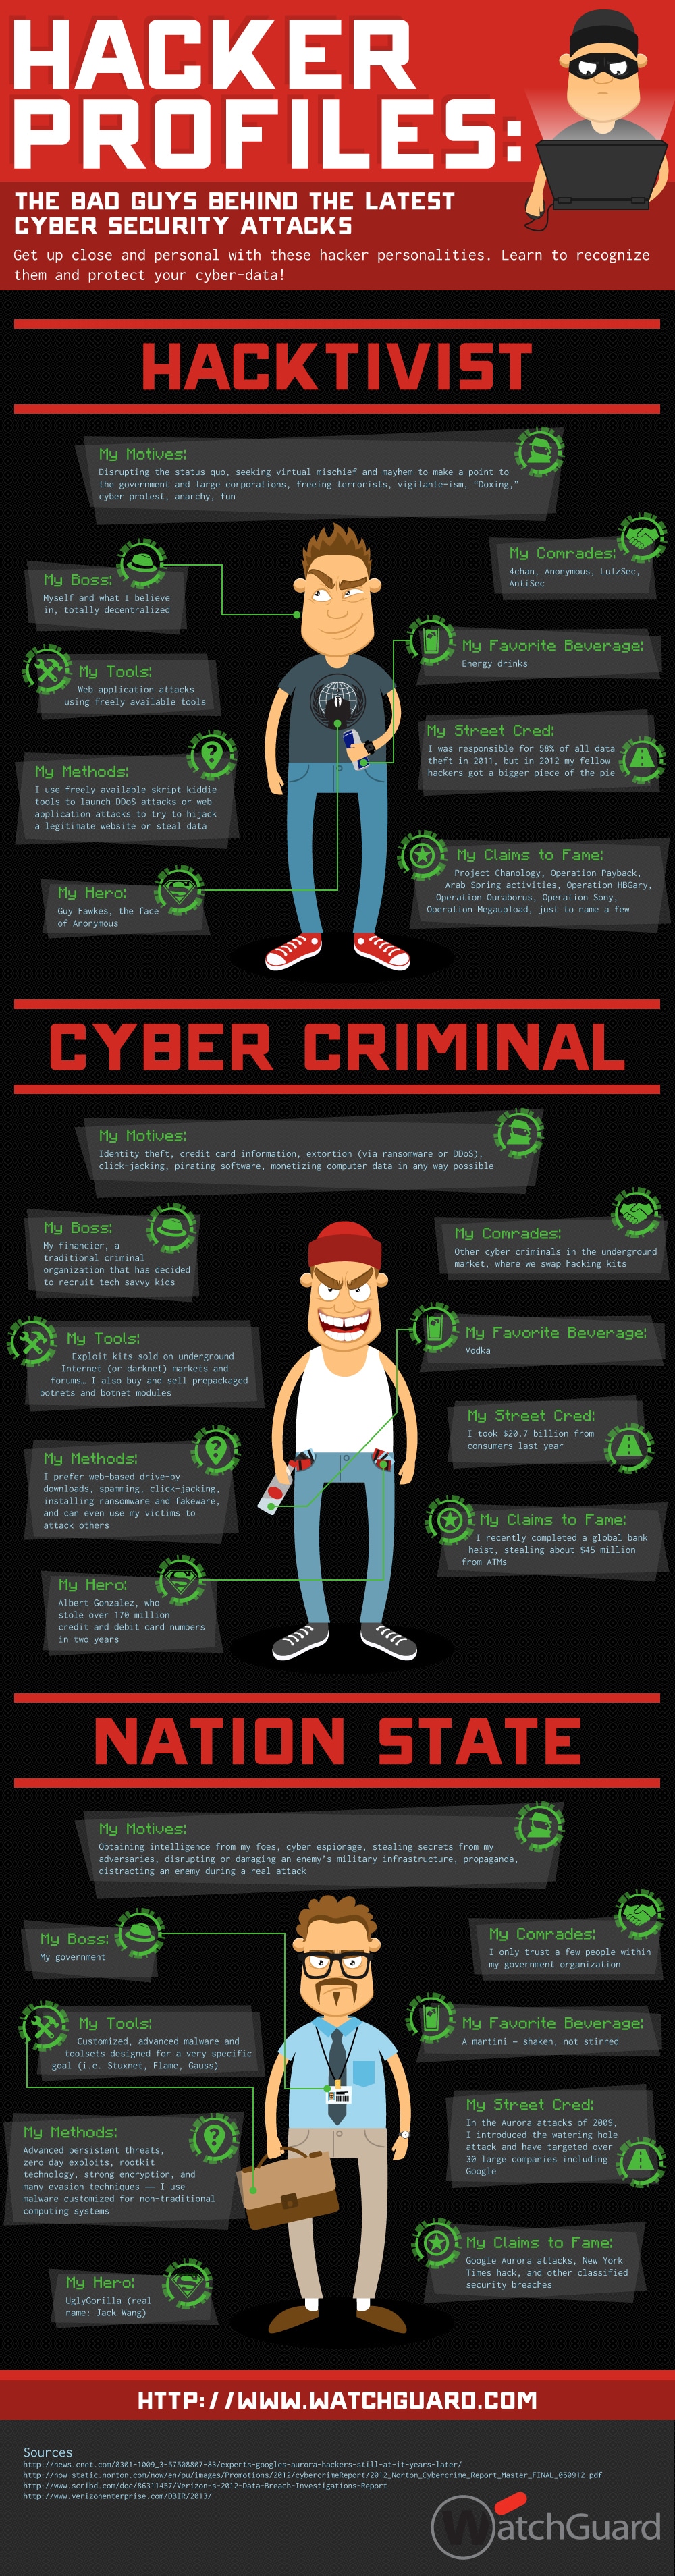 Hacker Profiles – The Bad Guys Of Online Security [Infographic]